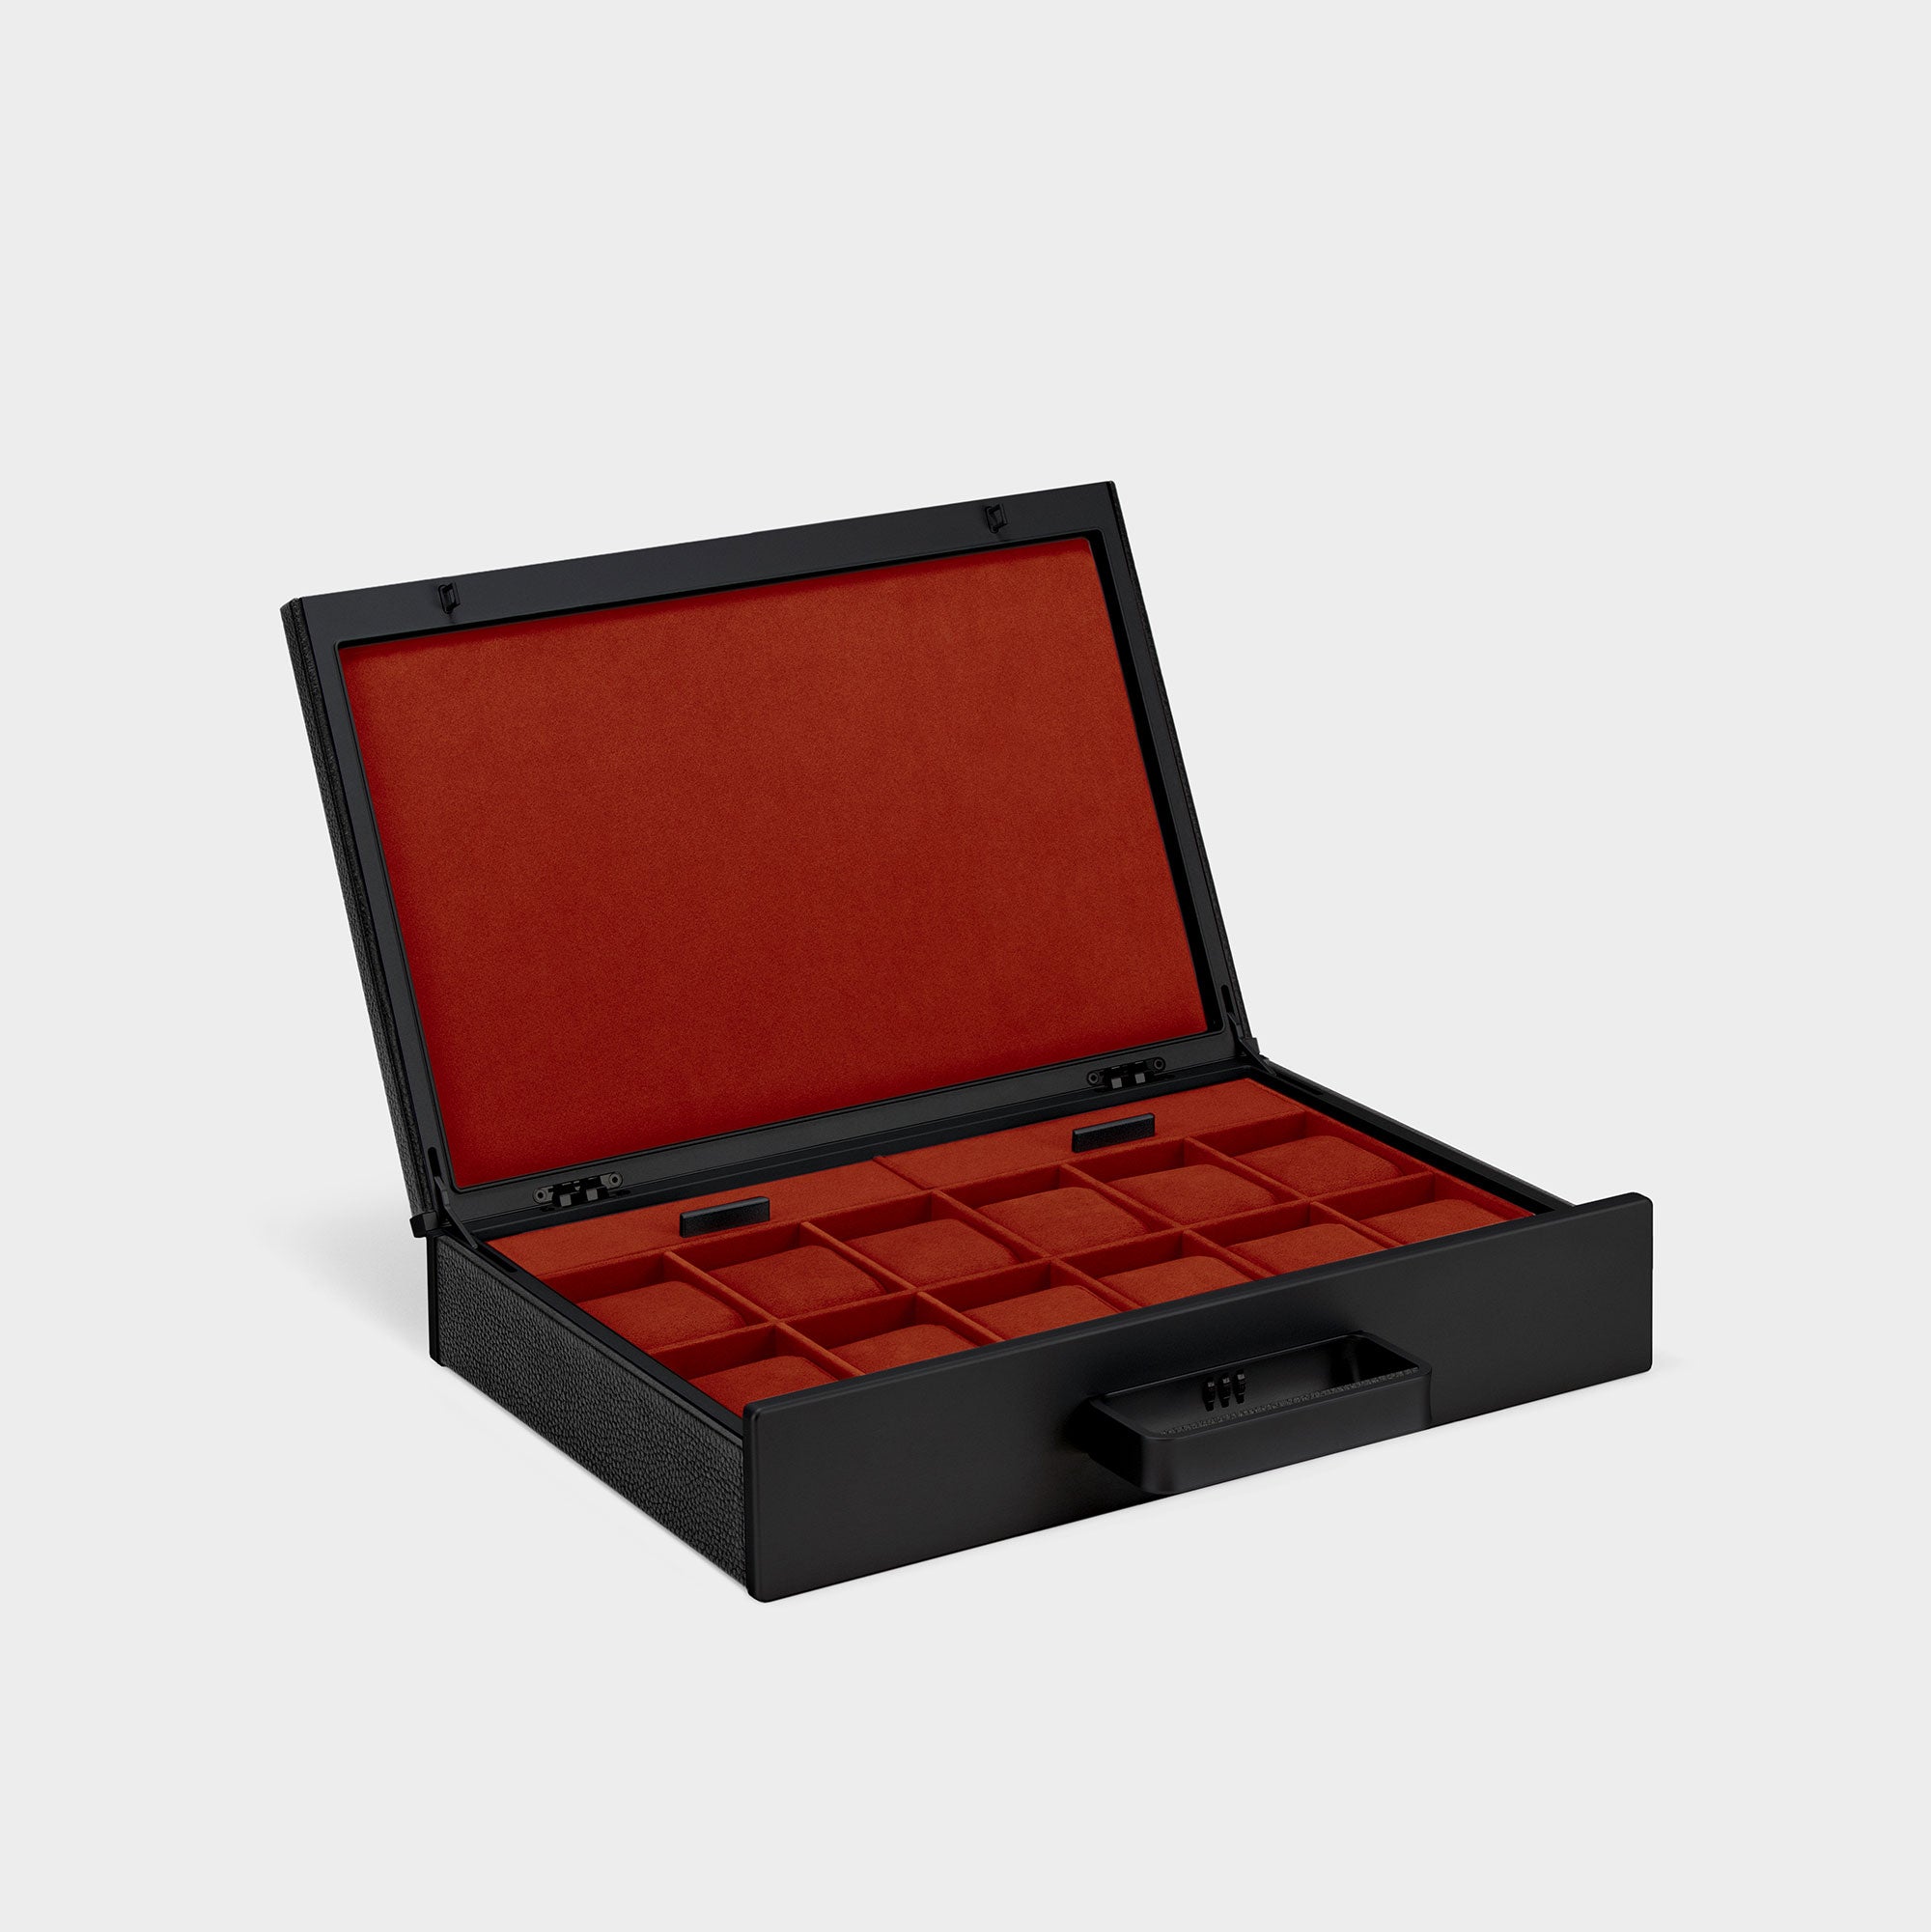 Charles Simon Mackenzie 12 watch briefcase in all black with Vermilion red interior made from fine leather, aluminum and carbon fiber casing and soft Alcantara interior lining